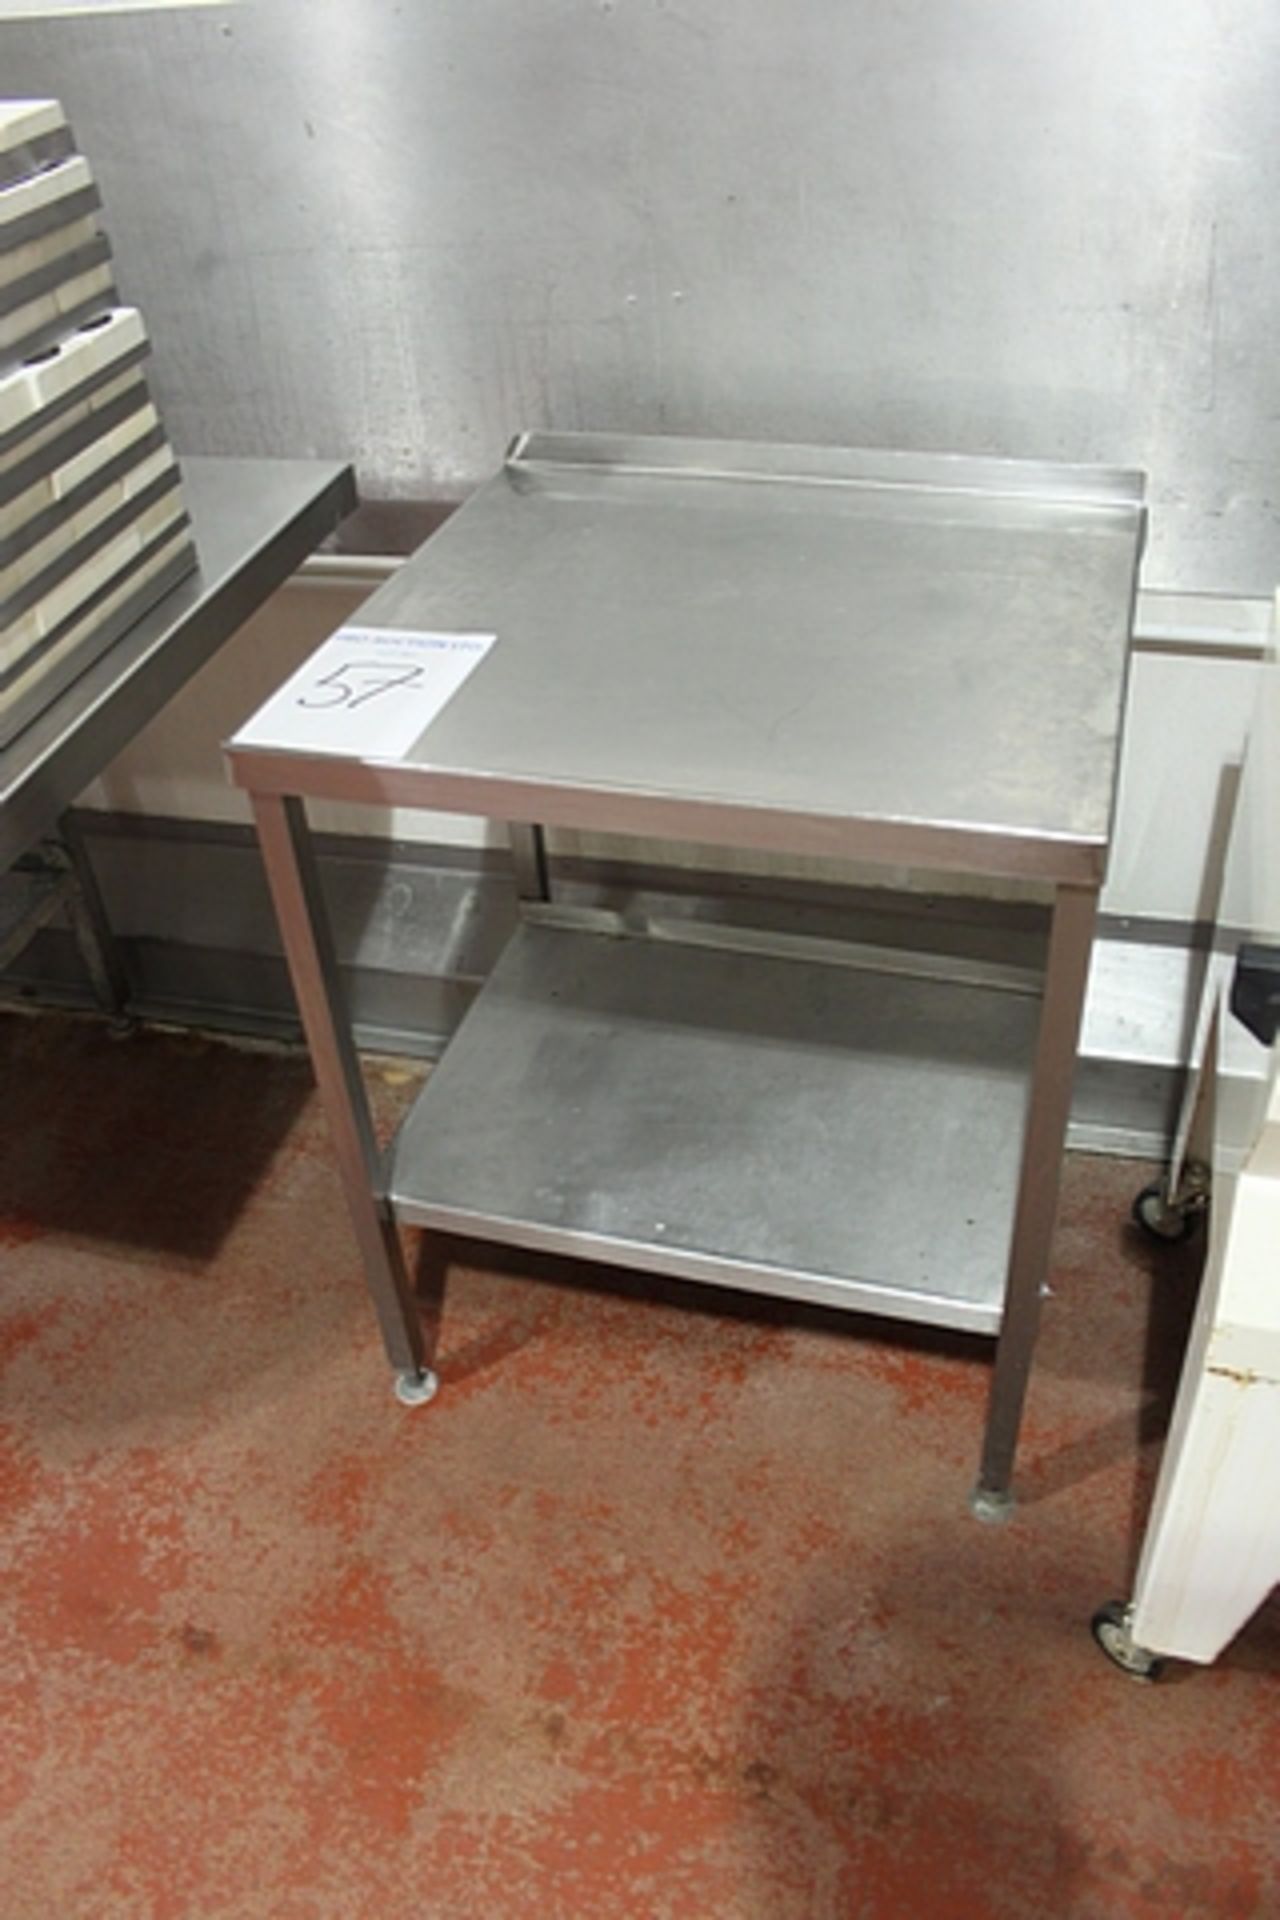 Stainless steel preparation table with up stand and shelf 700mm x 650mm x 850mm